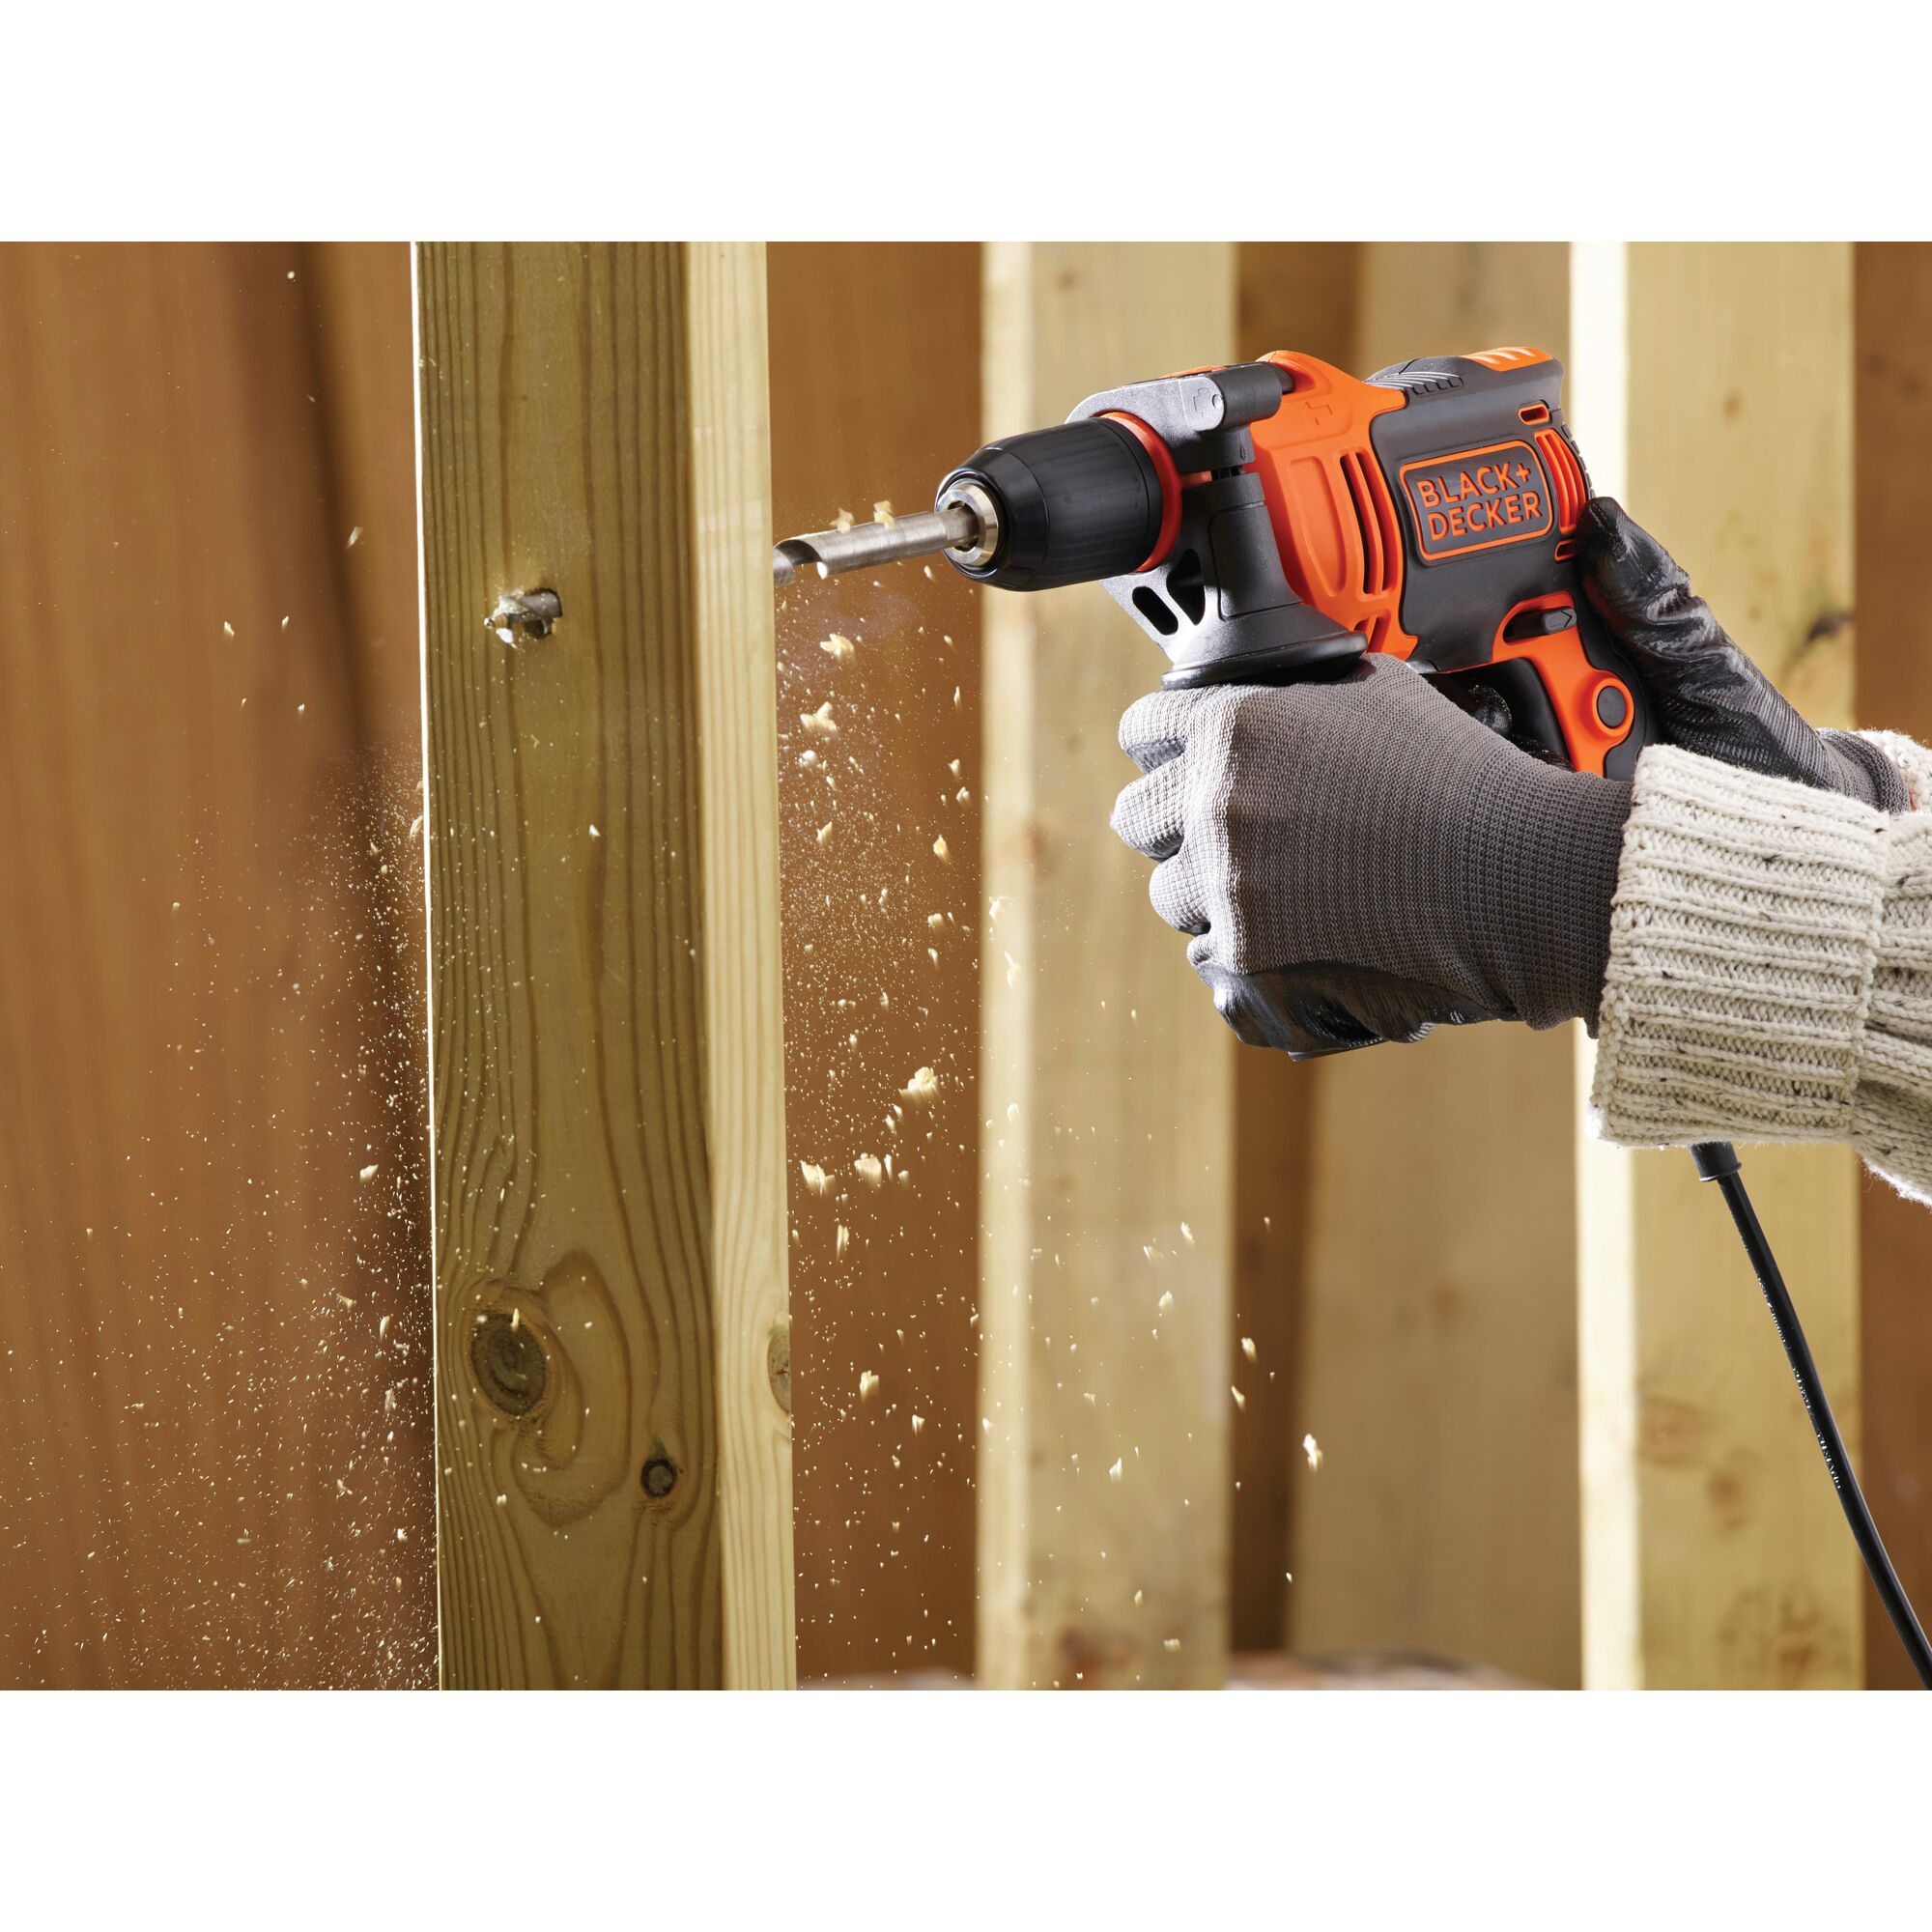 6 and a half Amp and half inch Hammer Drill being used to drill holes in a wooden structure.